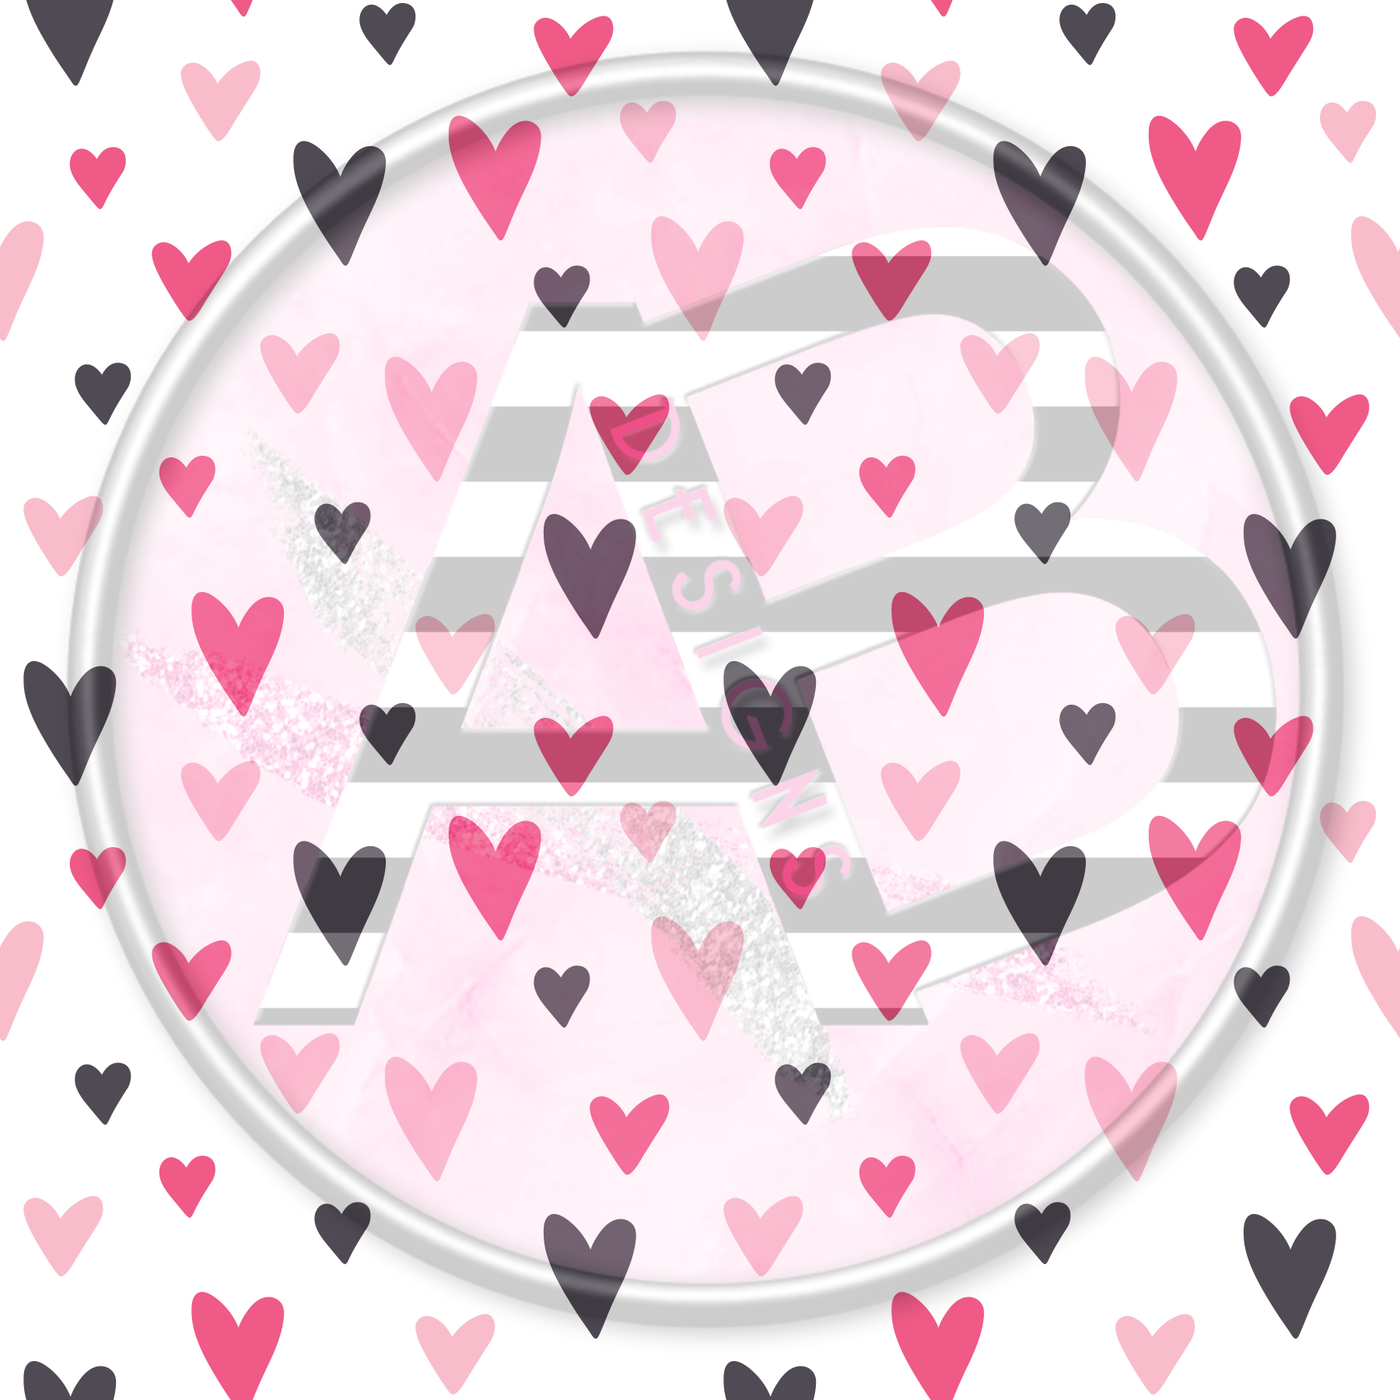 Adhesive Patterned Vinyl - Hearts 15